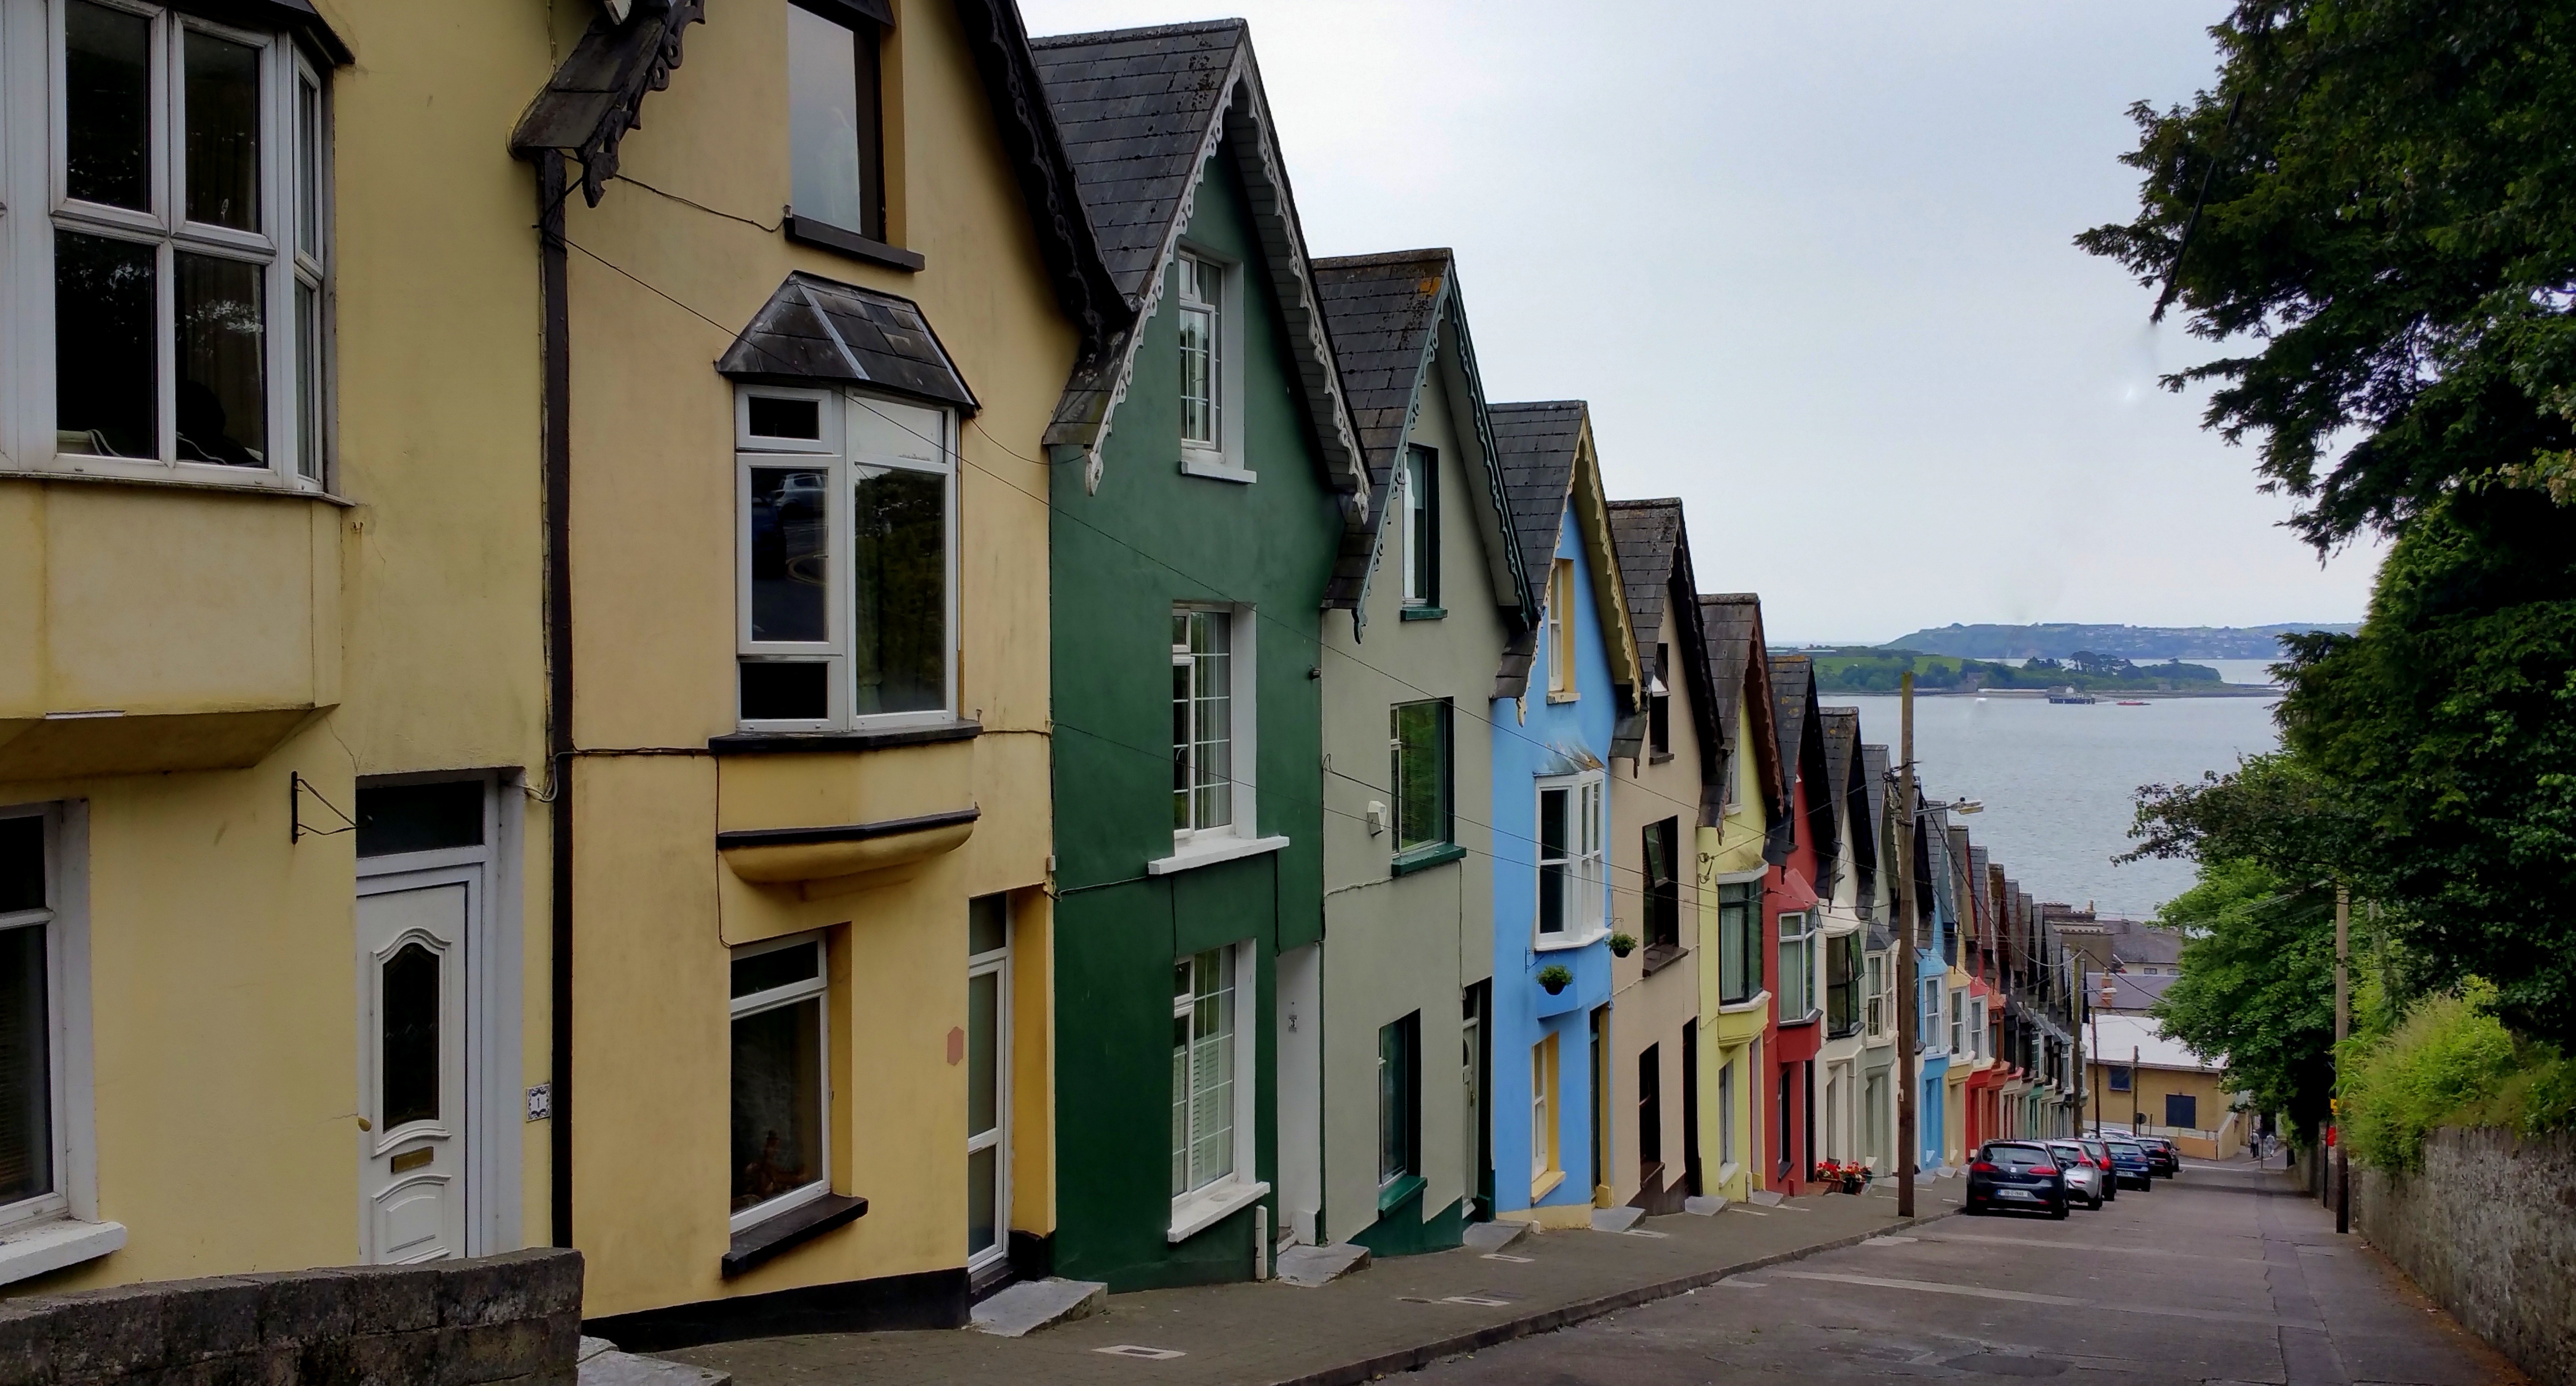 View of typical colorful Cork houses